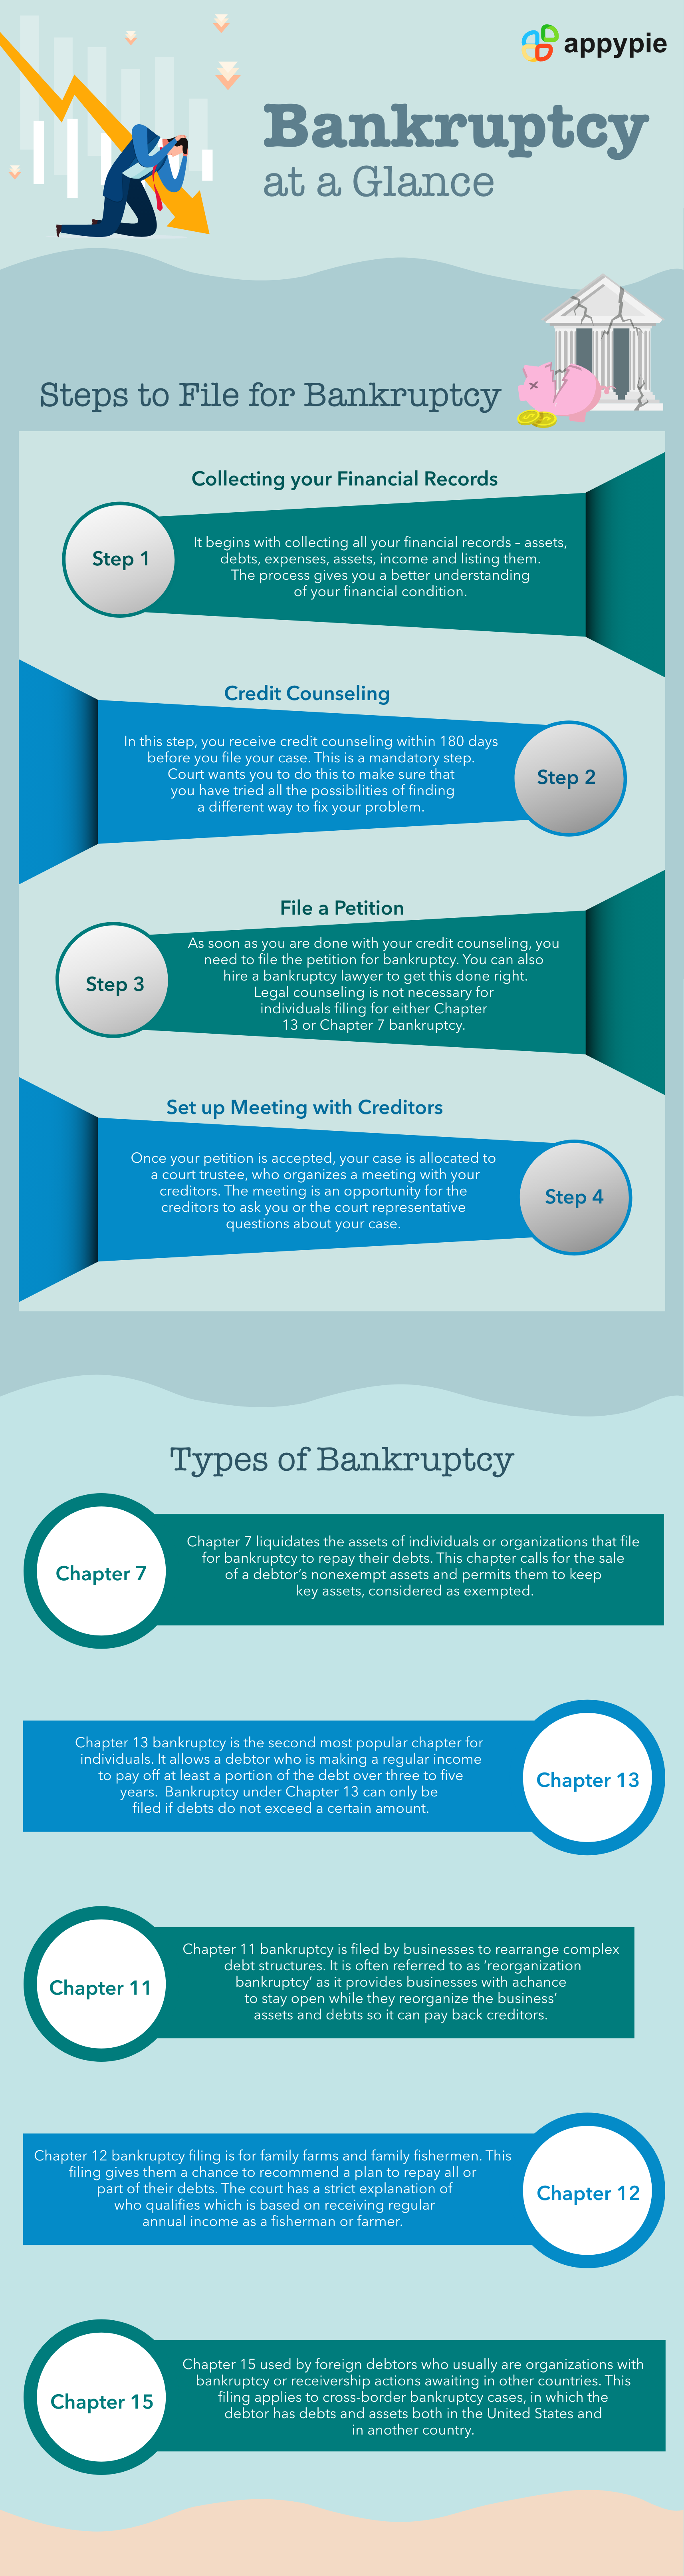 Appy Pie - What is Bankruptcy?